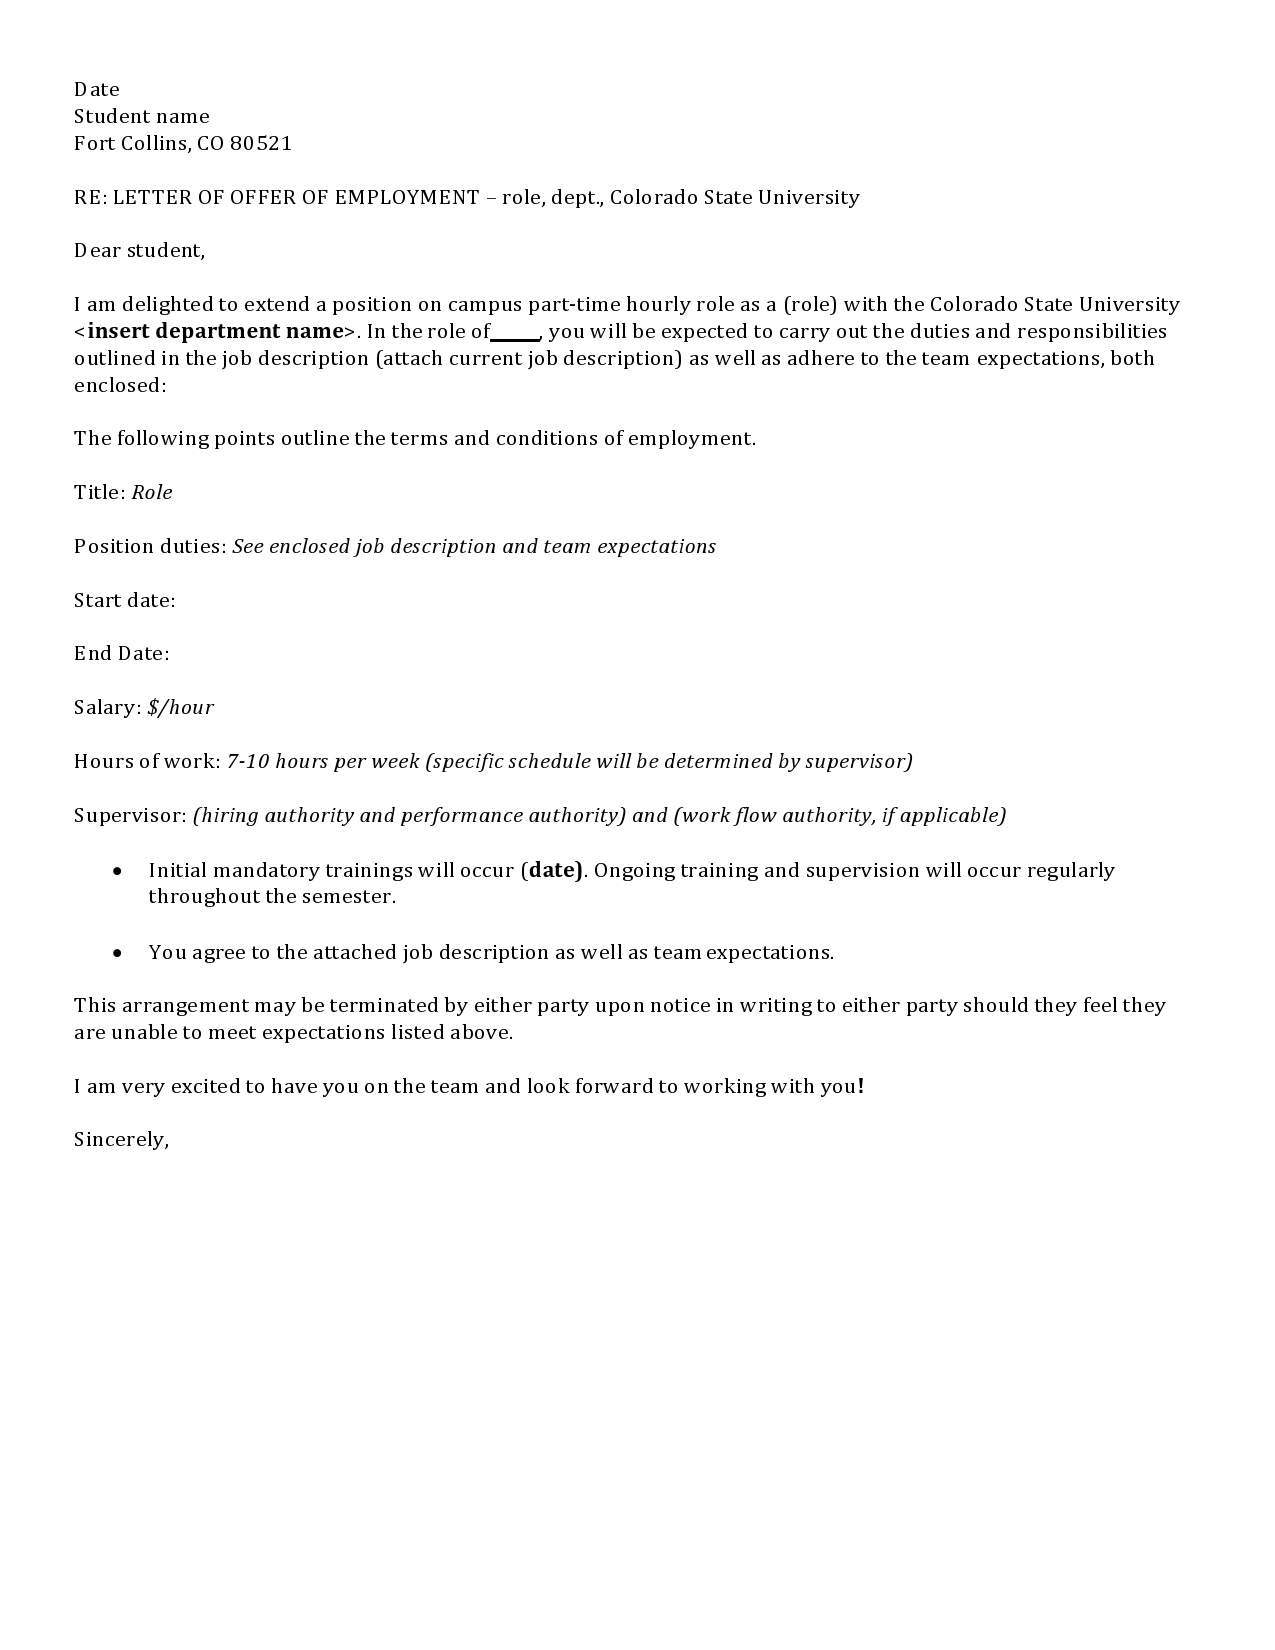 Free employment offer letter template 24